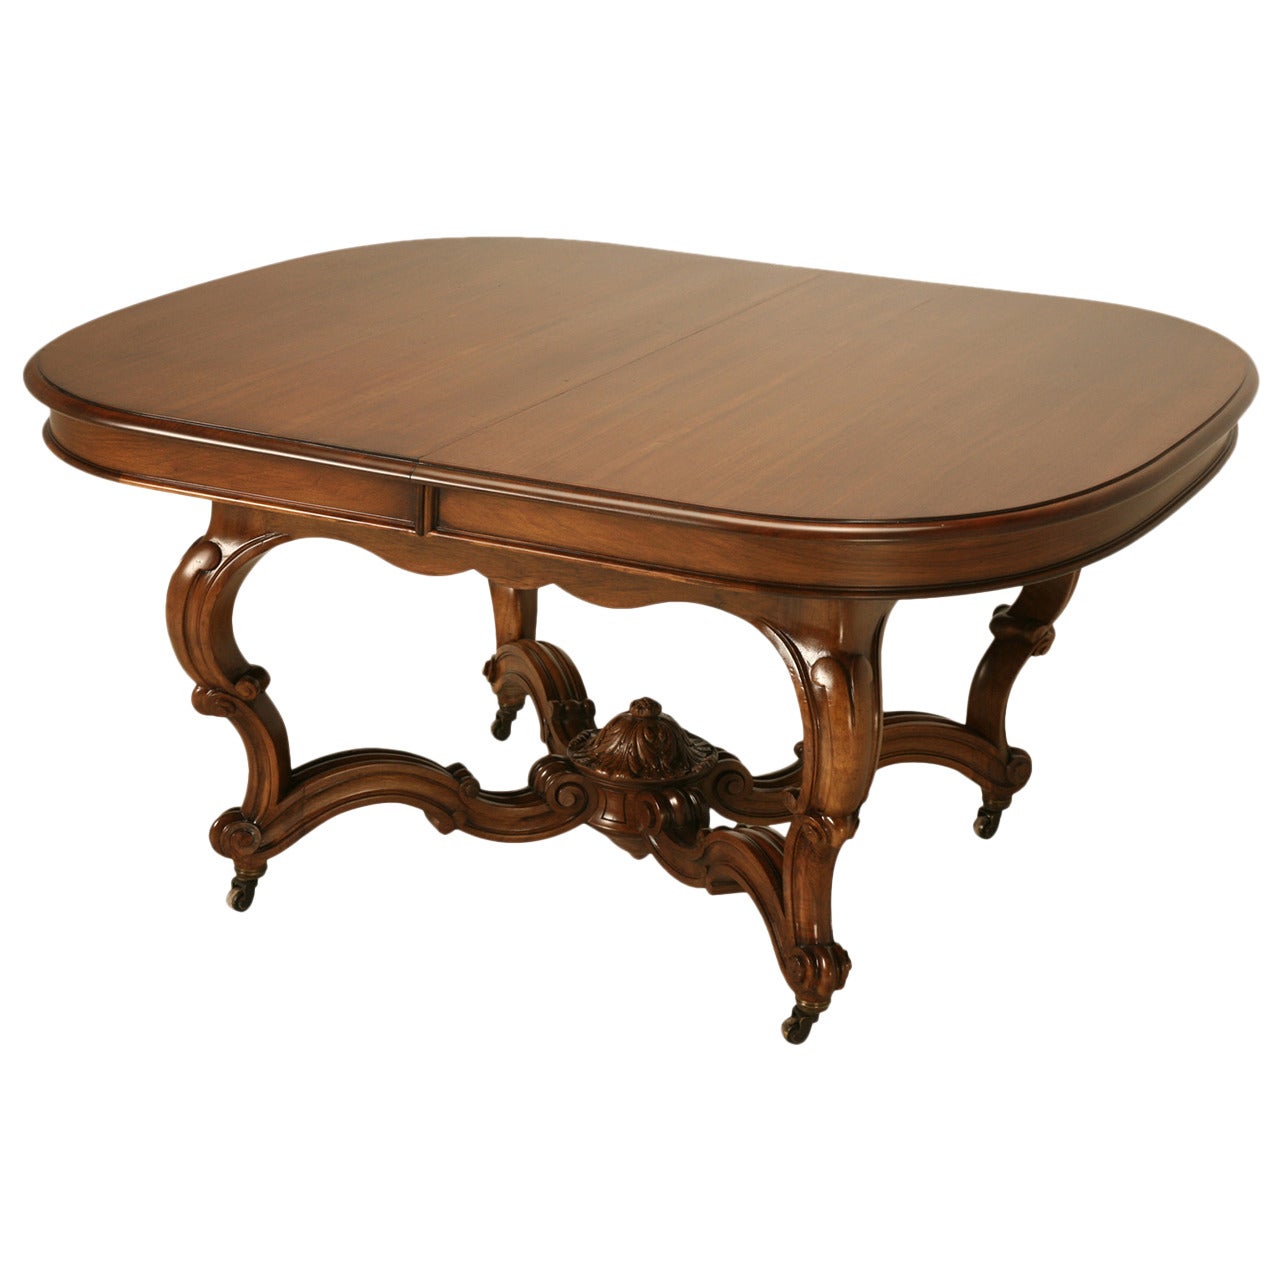 French Walnut Dining Table with Leaves from Ch. Jeanselme et Cie, circa 1890